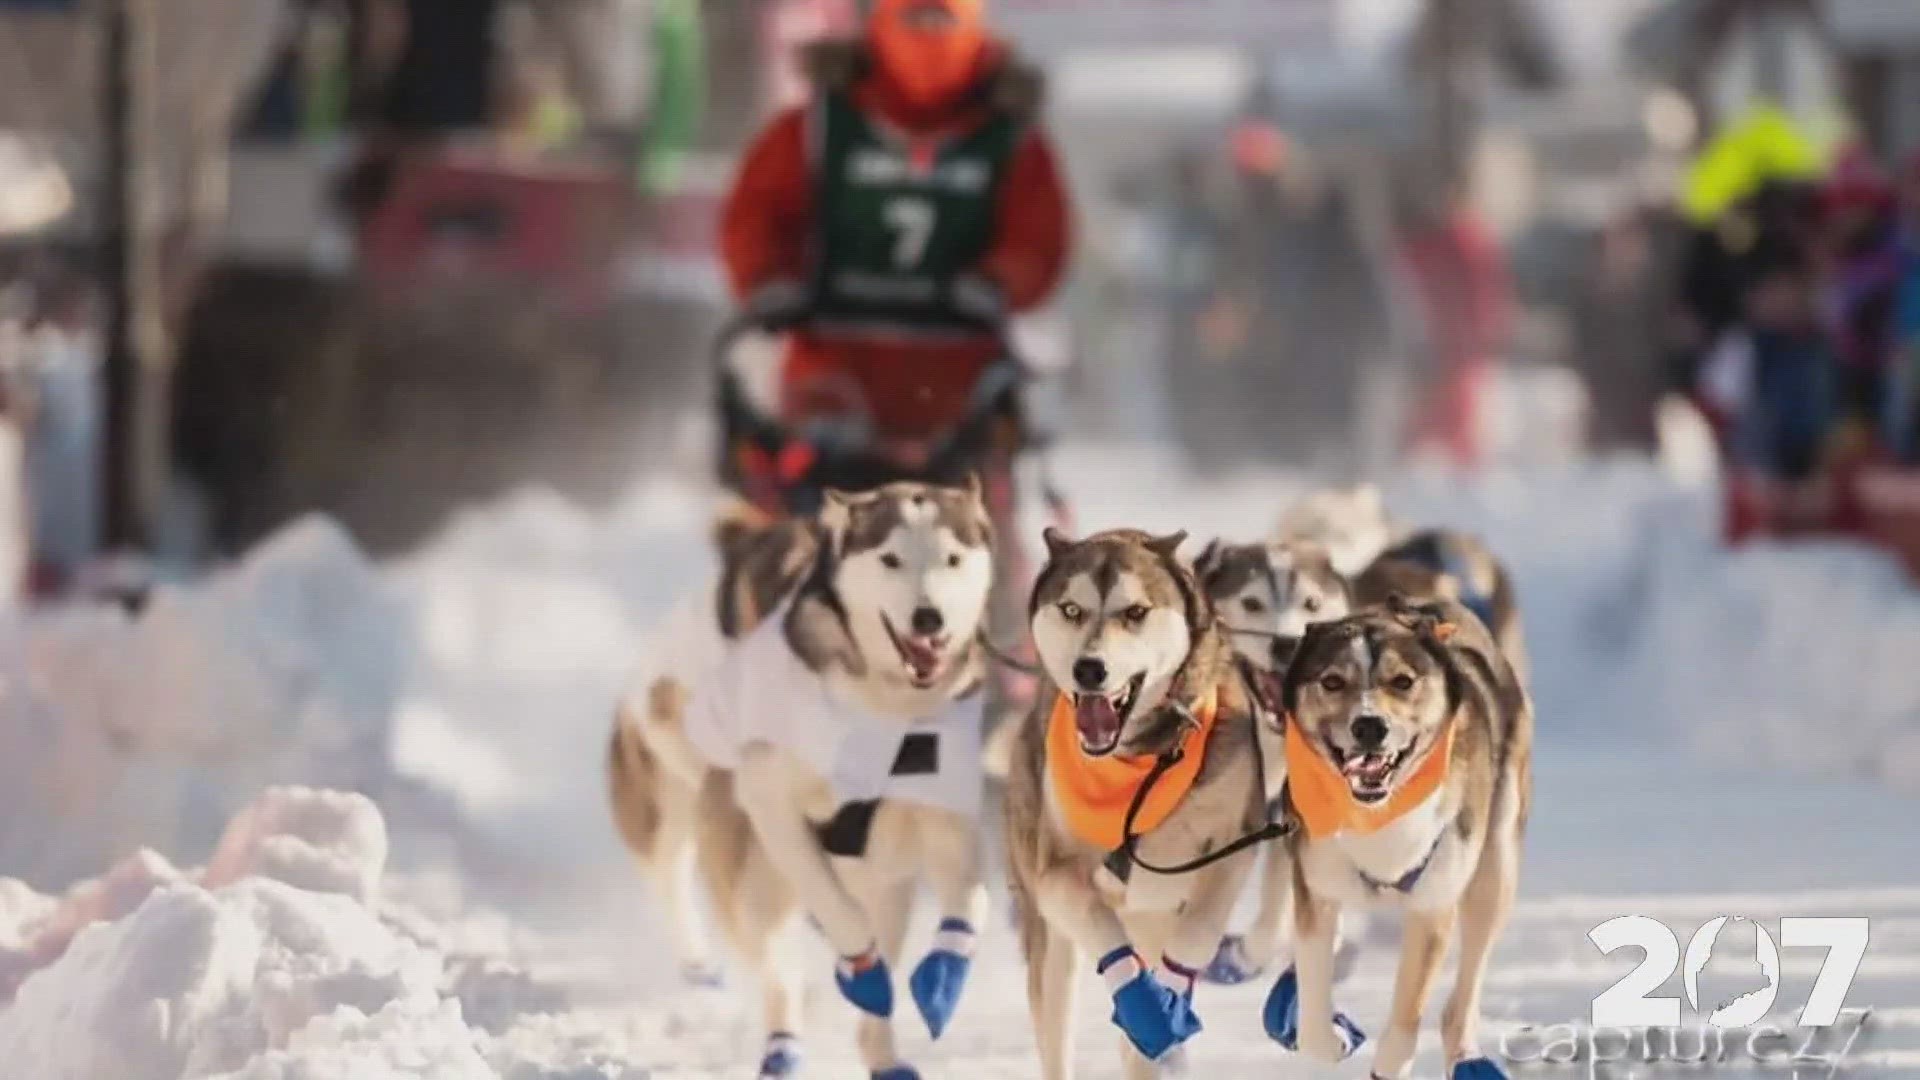 Kacey McCarty has been racing sled dogs since she was a teenager but said her love for the sport started when she was just 10. Now, she runs her own kennel.